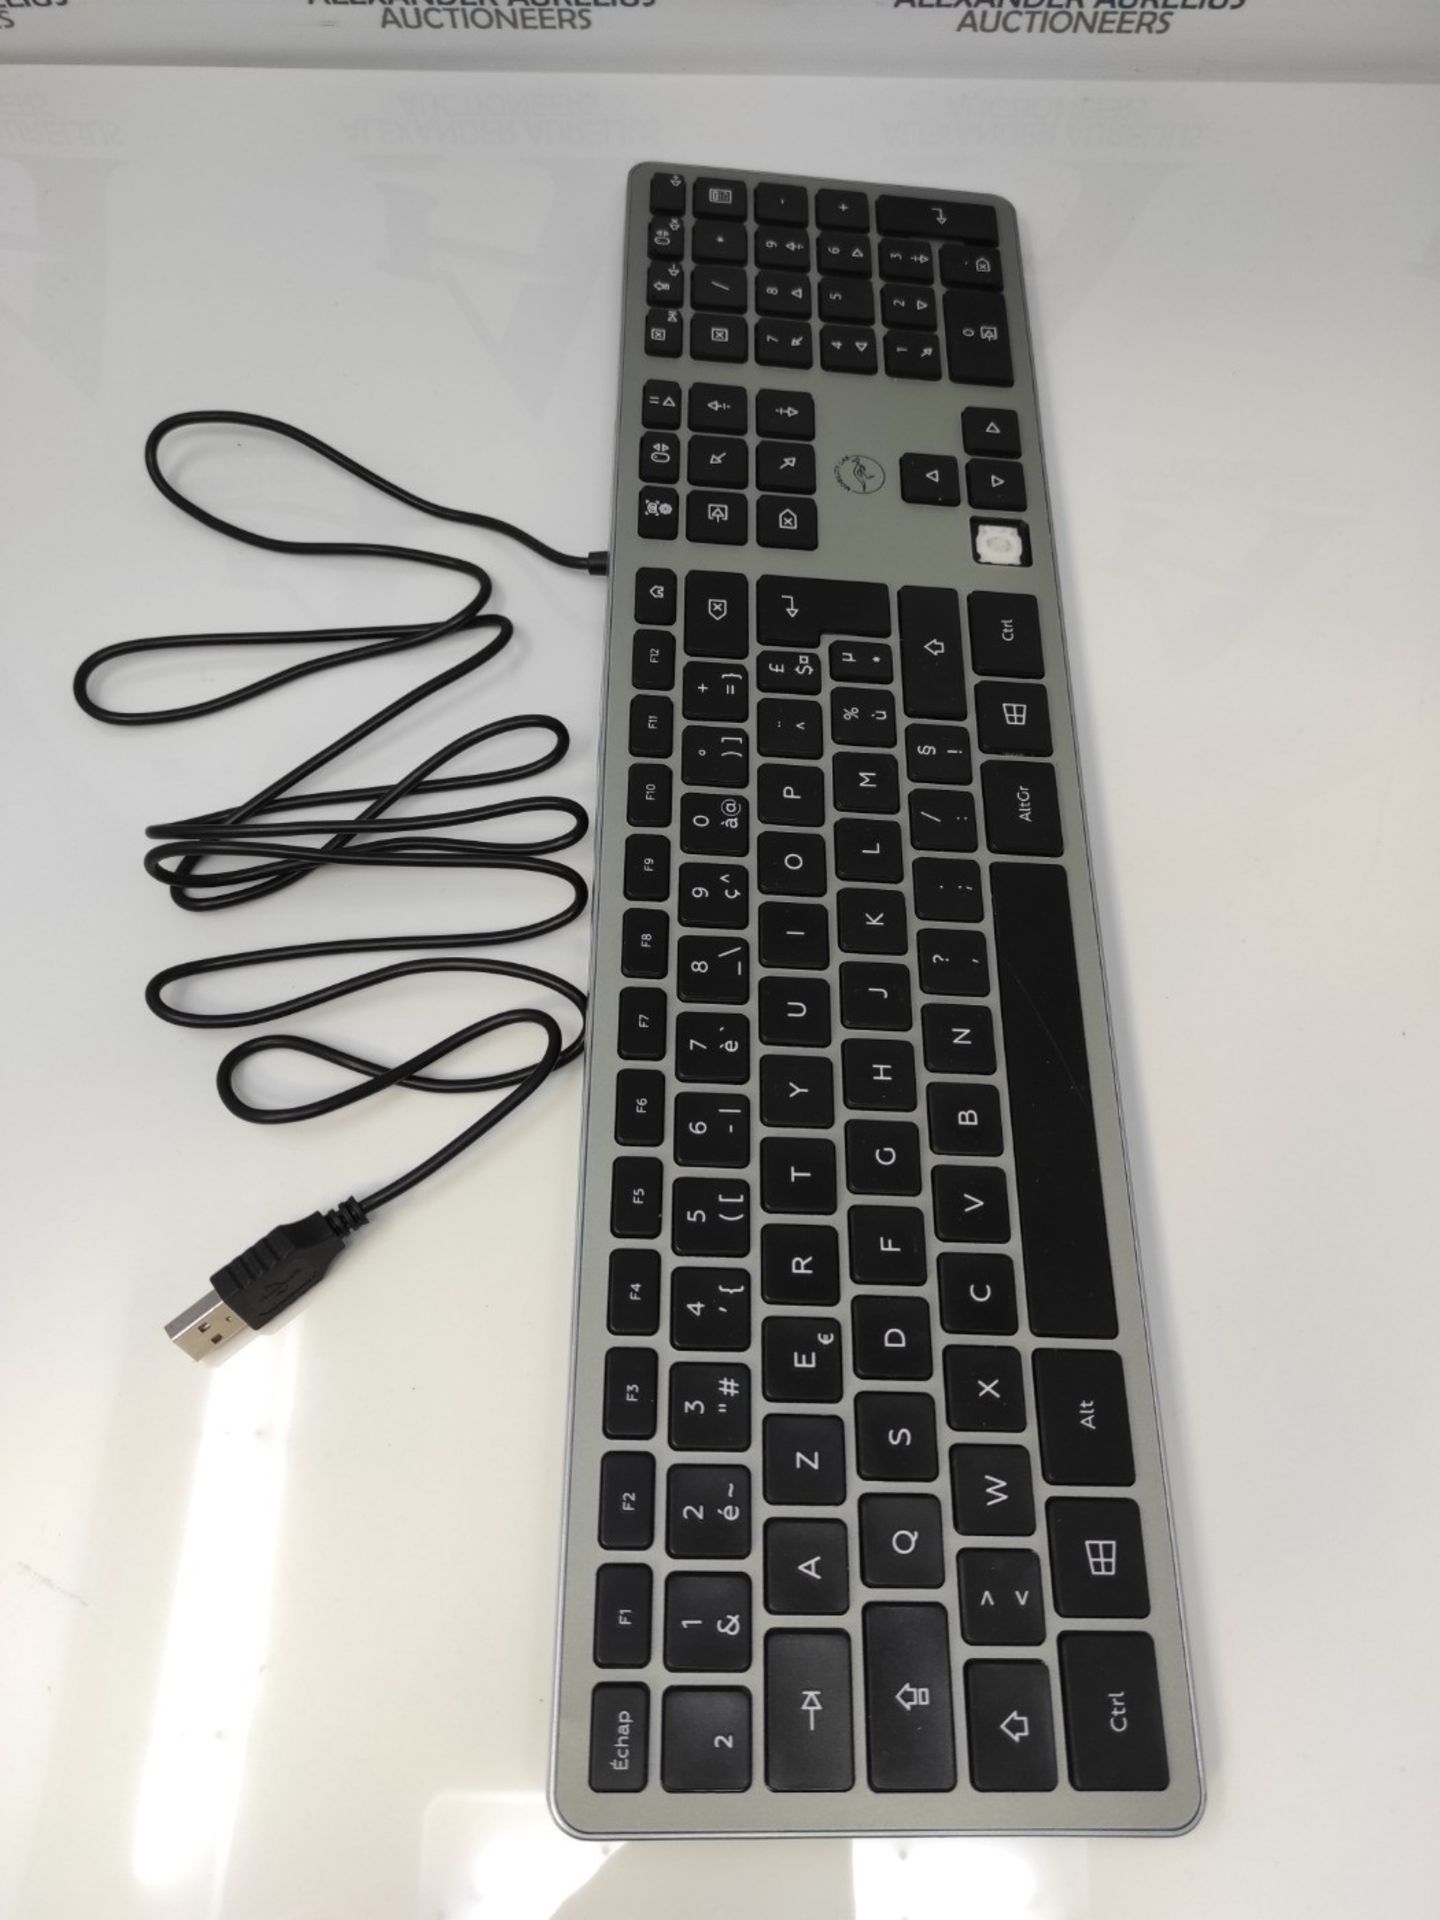 Mobility Lab - Ultra Slim Wired PC Keyboard - Space Grey - USB Connection - French AZE - Image 3 of 3